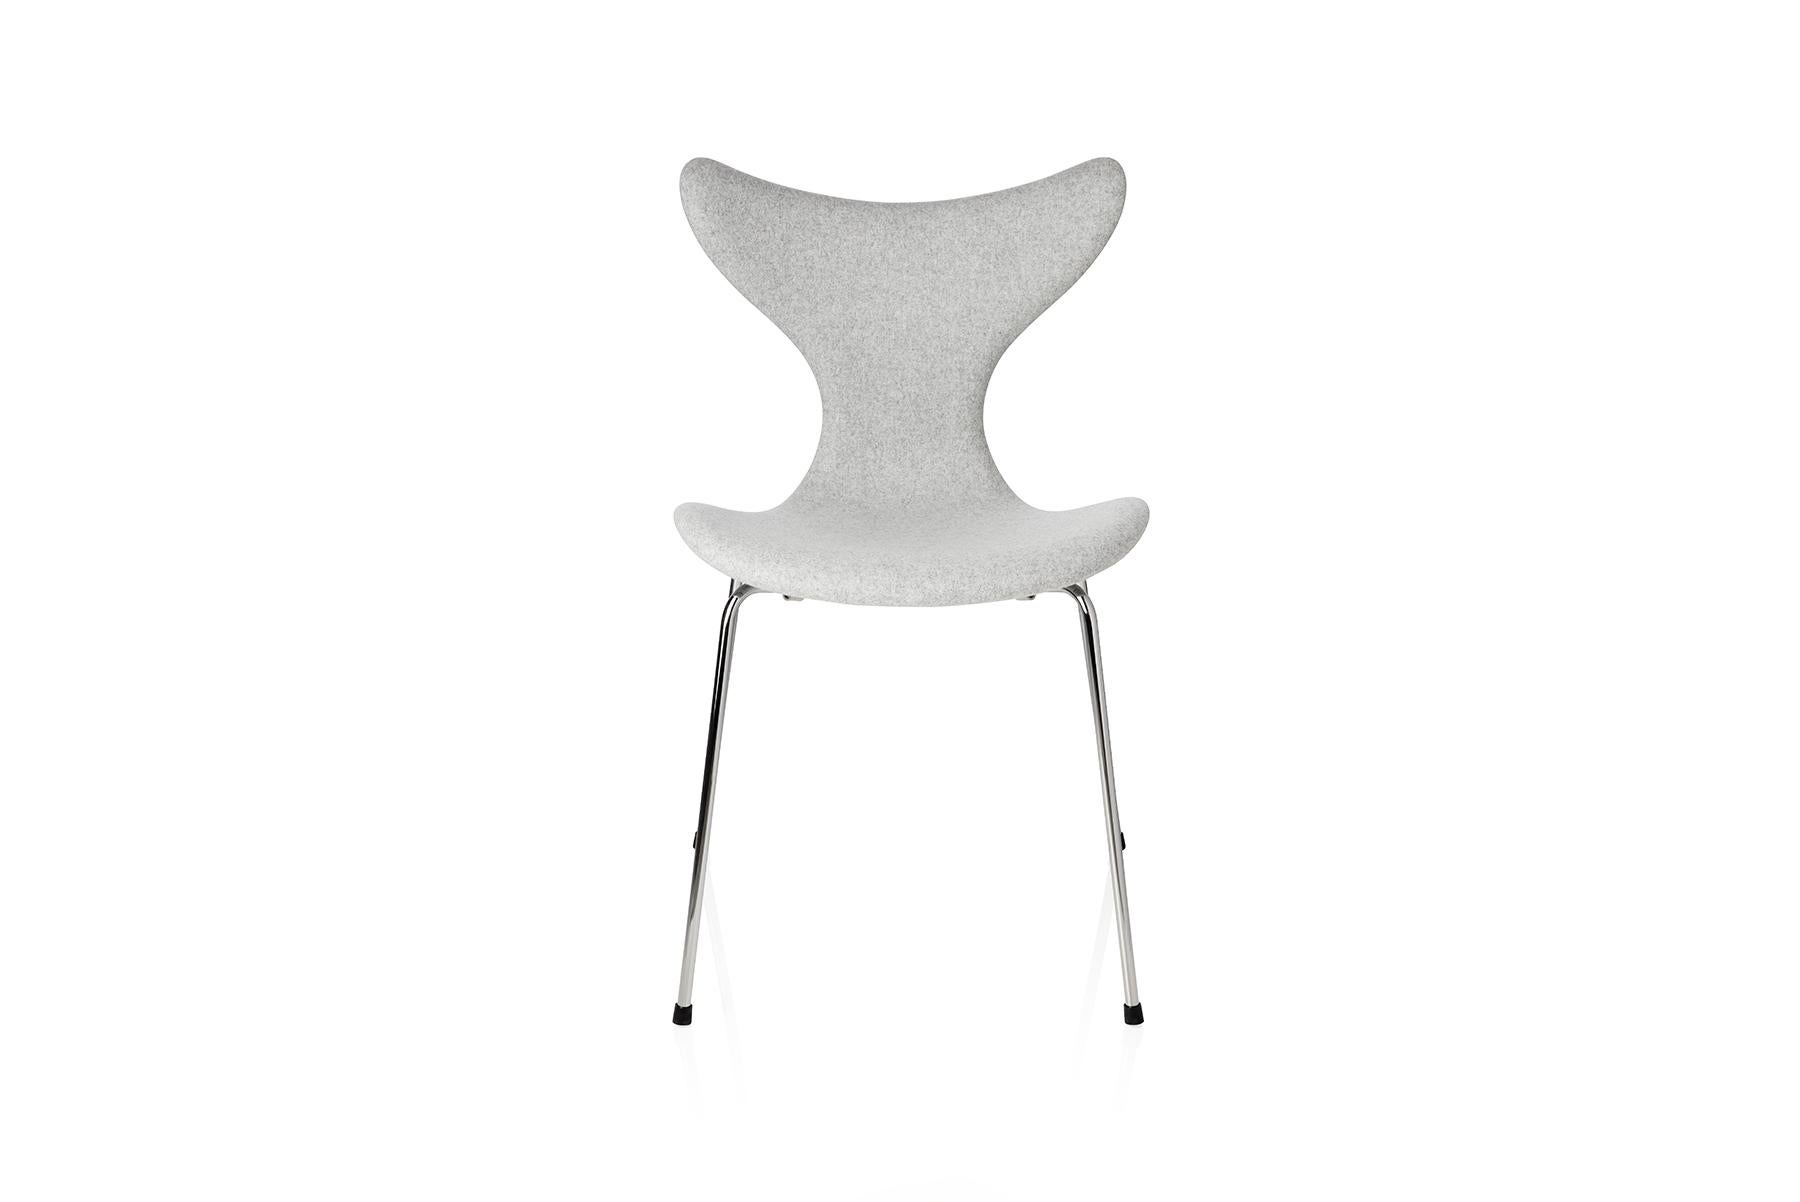 This series 8 chair was originally designed for the Danish National Bank. It is often referred to as the Lily™. The first model was 3108 from 1968, and the chair was introduced to the market with arms, model 3208, at the Danish Furniture Fair in